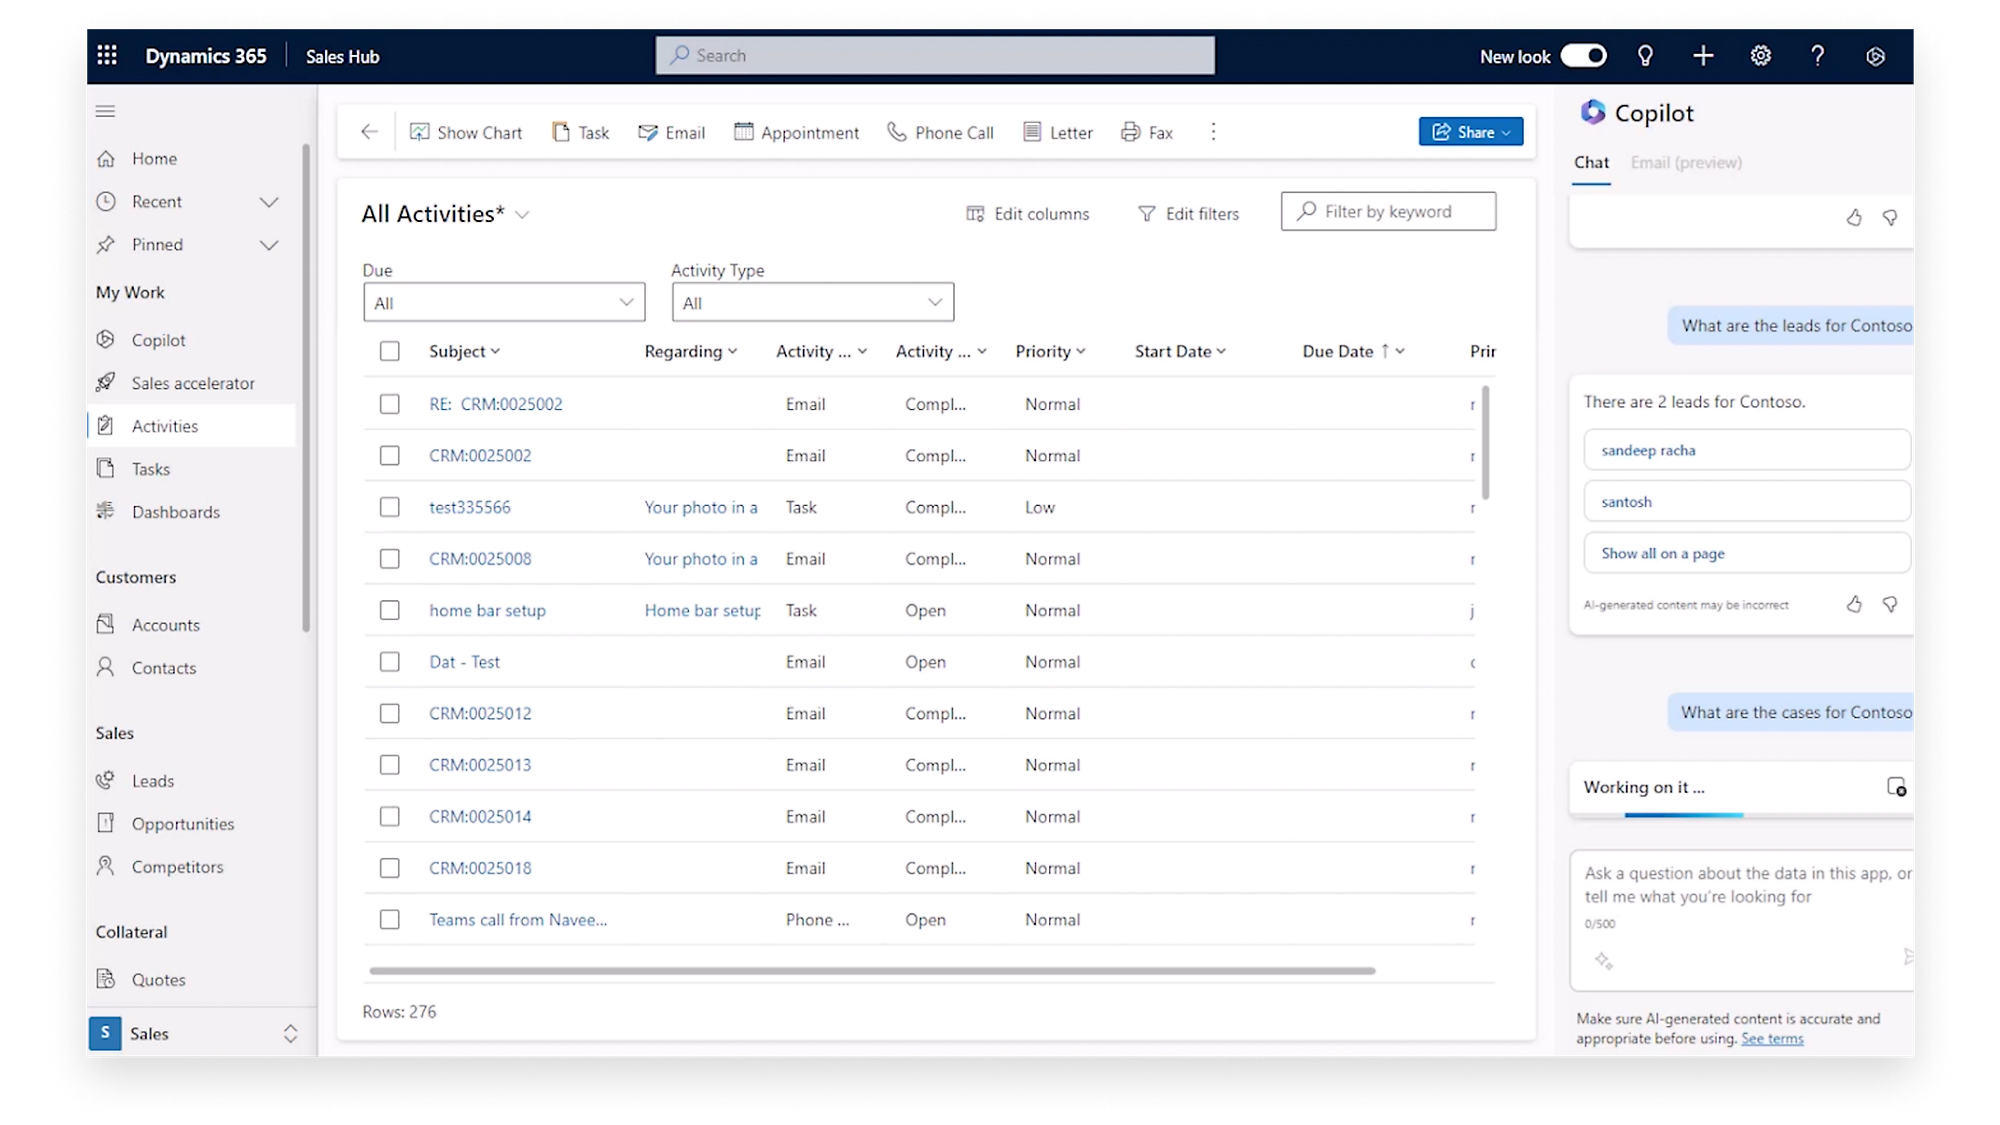 Dynamics 365 Sales Hub offers various features including Home, Search,Chart Task,Email, Appointment,Letter Fax,Copilot